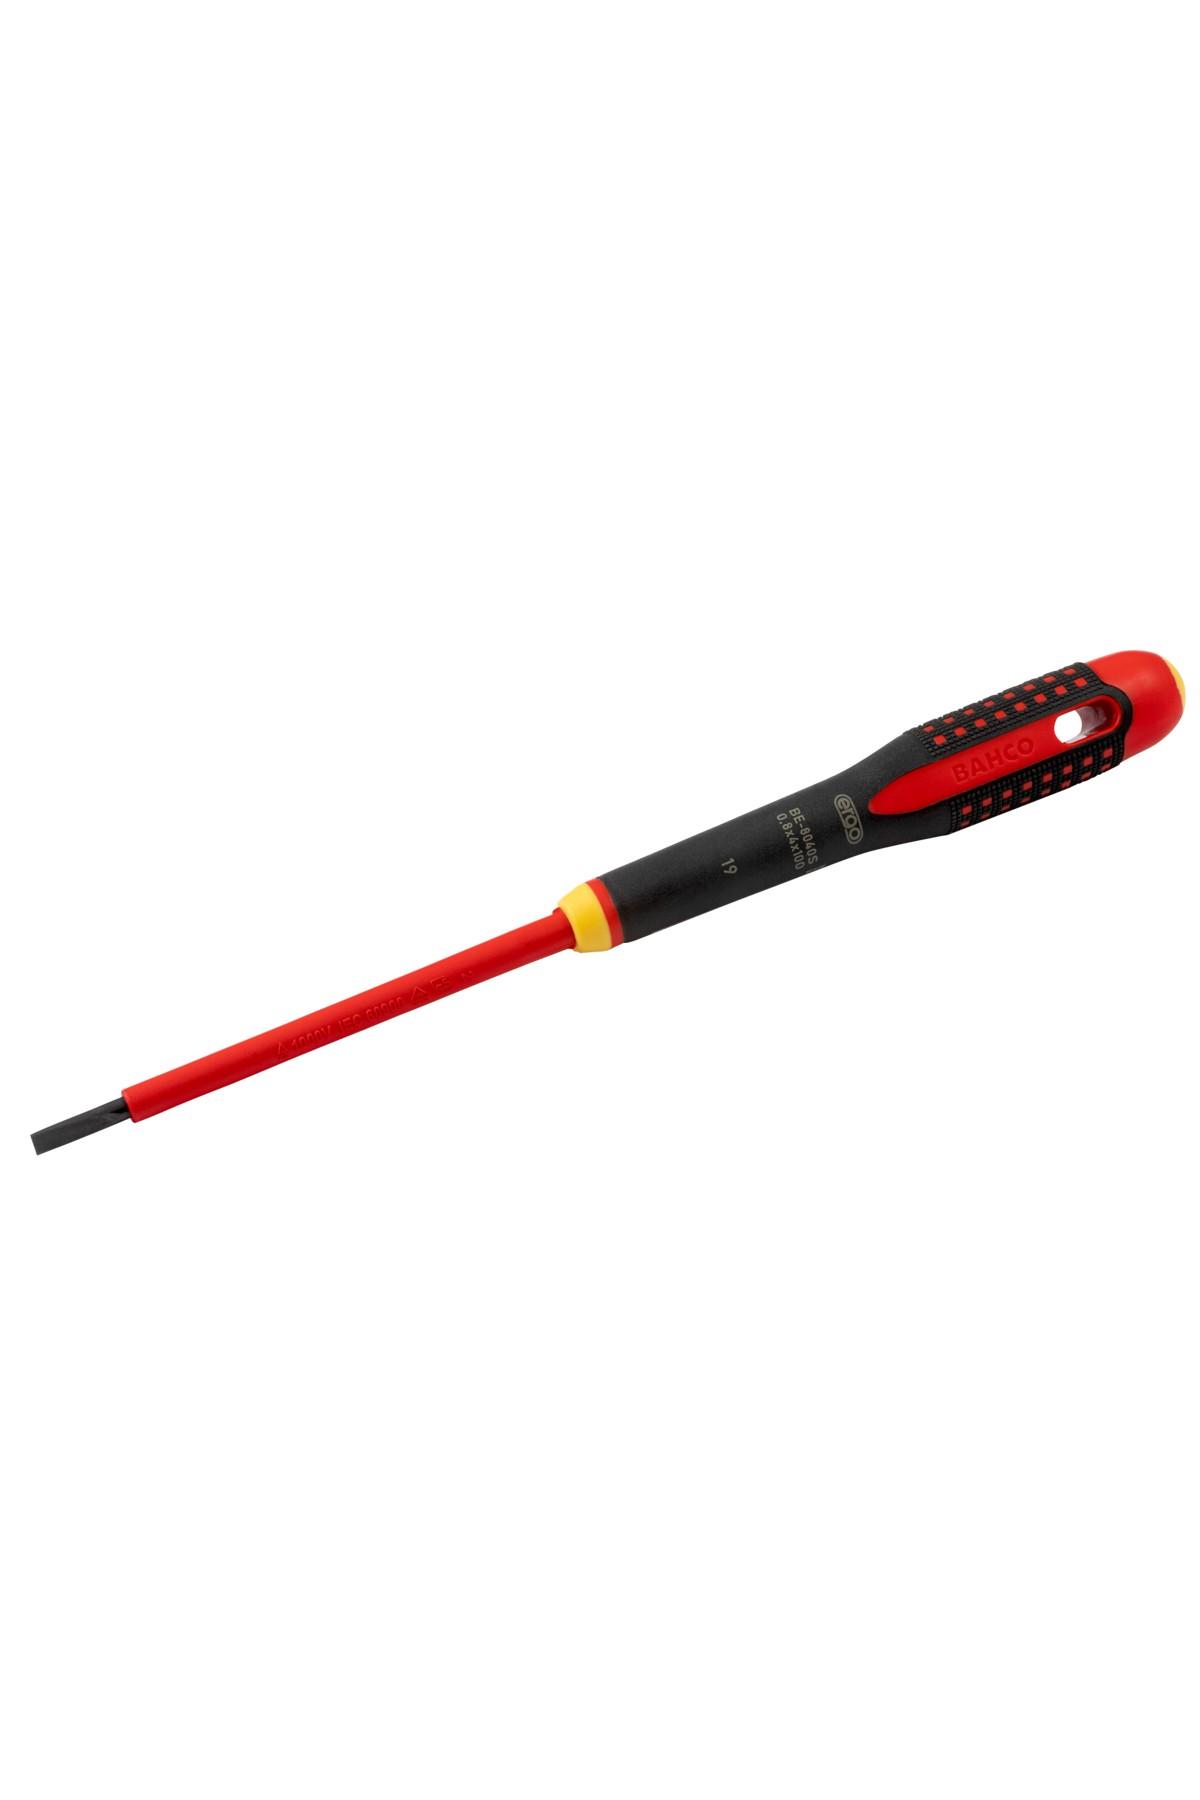 ERGO ™ VDE Insulated straight slot screwdriver with 3-component handle 2.5 mm - 12 mm